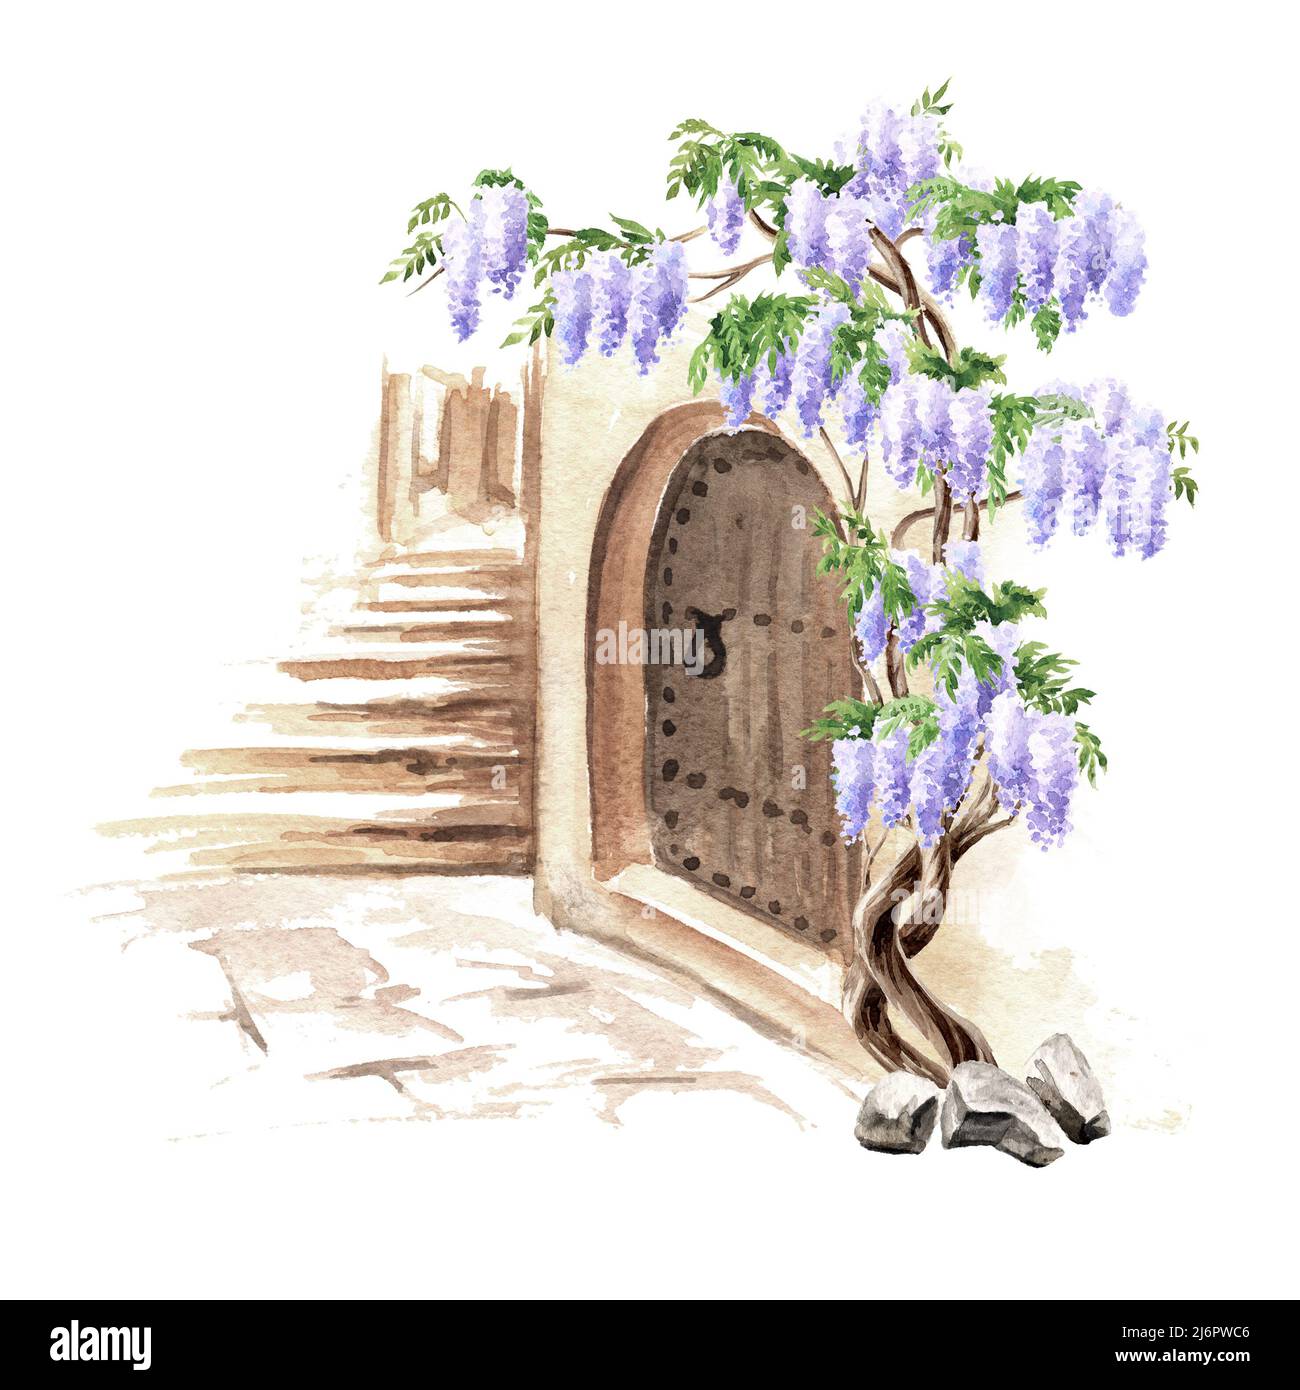 Old  architecture  and Wisteria  blossom  tree. Hand  drawn watercolor  illustration isolated on white background Stock Photo